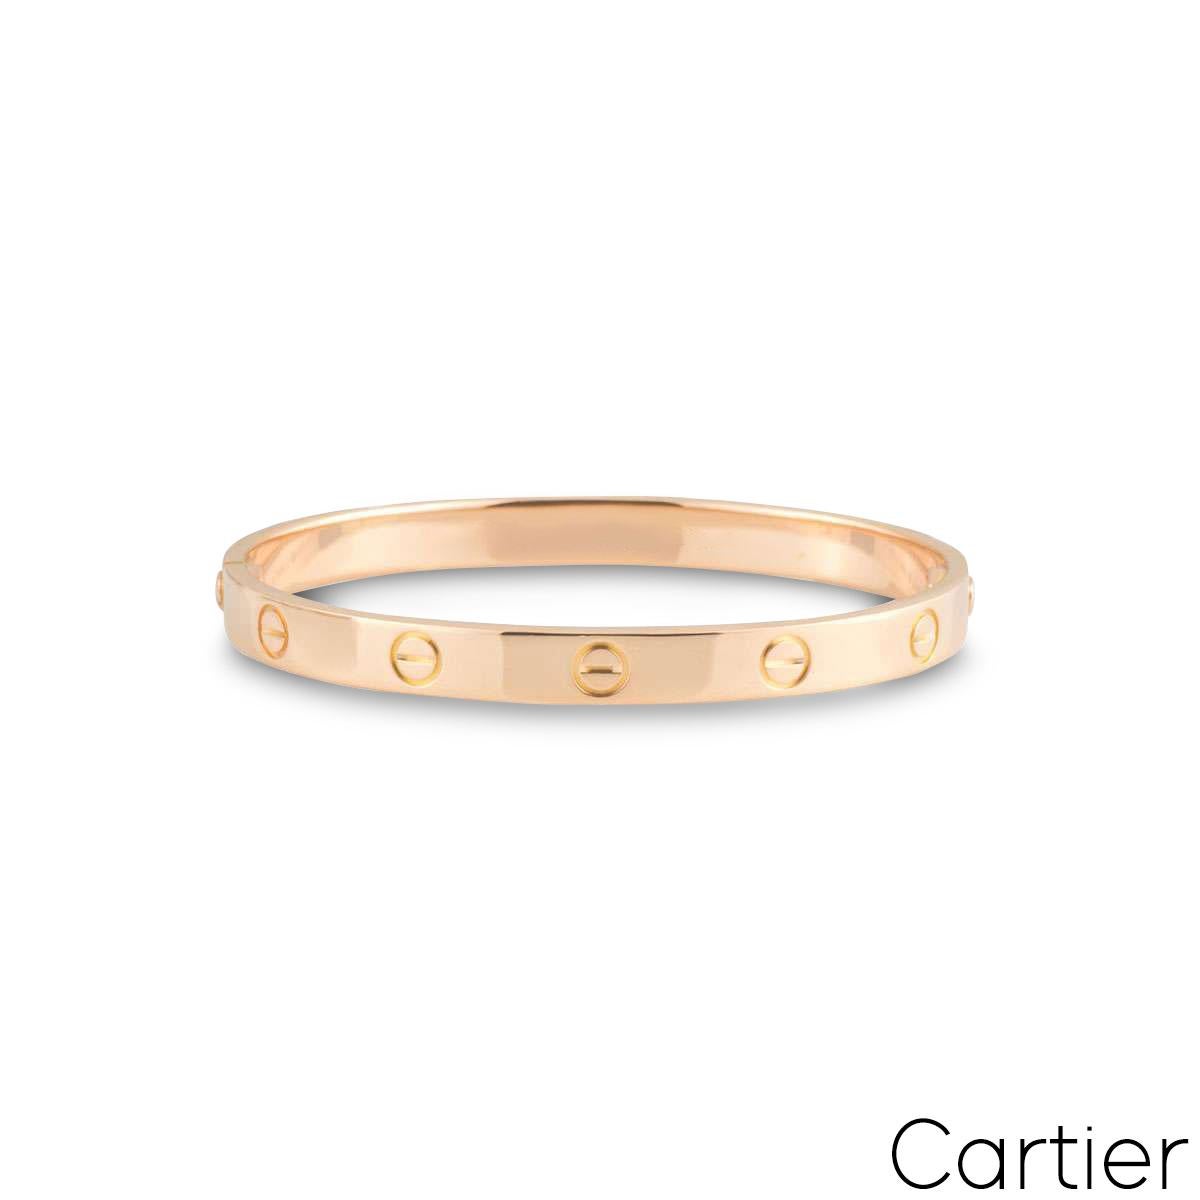 An iconic 18k rose gold Cartier bracelet from the Love collection. The bracelet comprises of the iconic screw motifs around the outer edge. The bracelet is a size 18 and features the new style screw system with a gross weight of 30.00 grams.

The